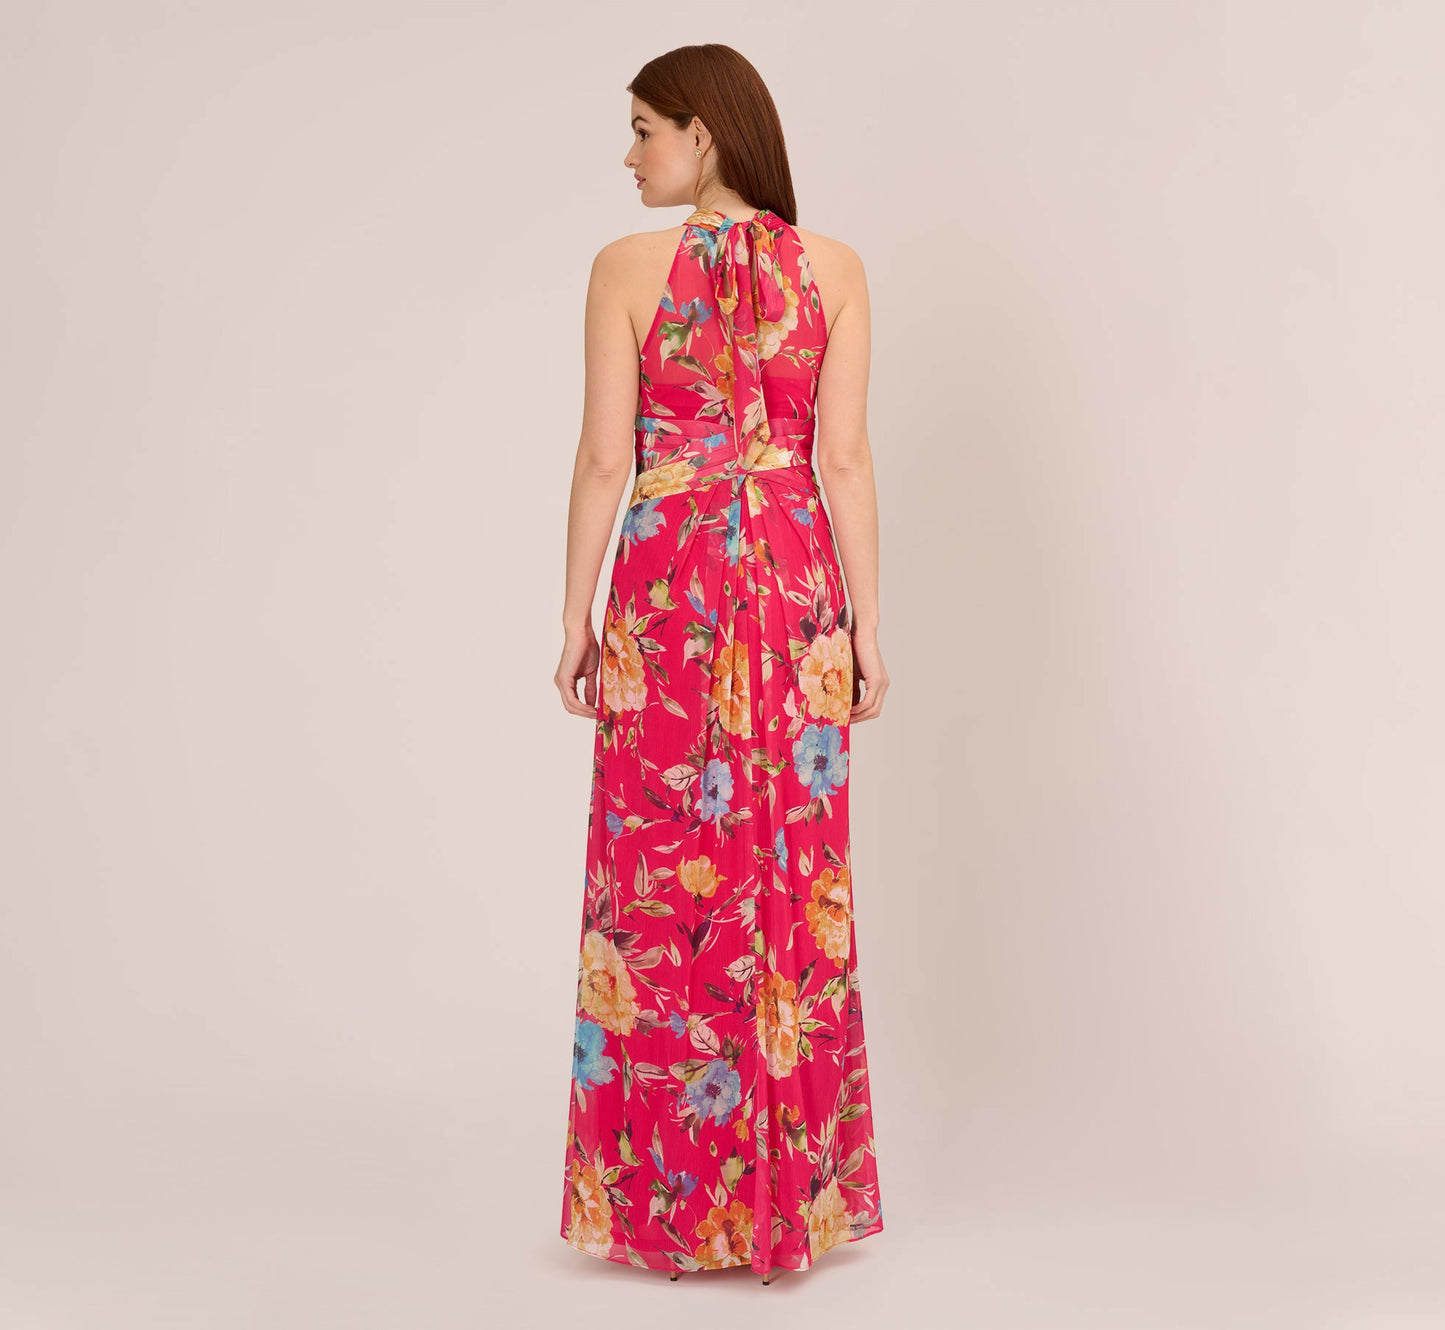 Adrianna Papell Floral Chiffon Halter Gown